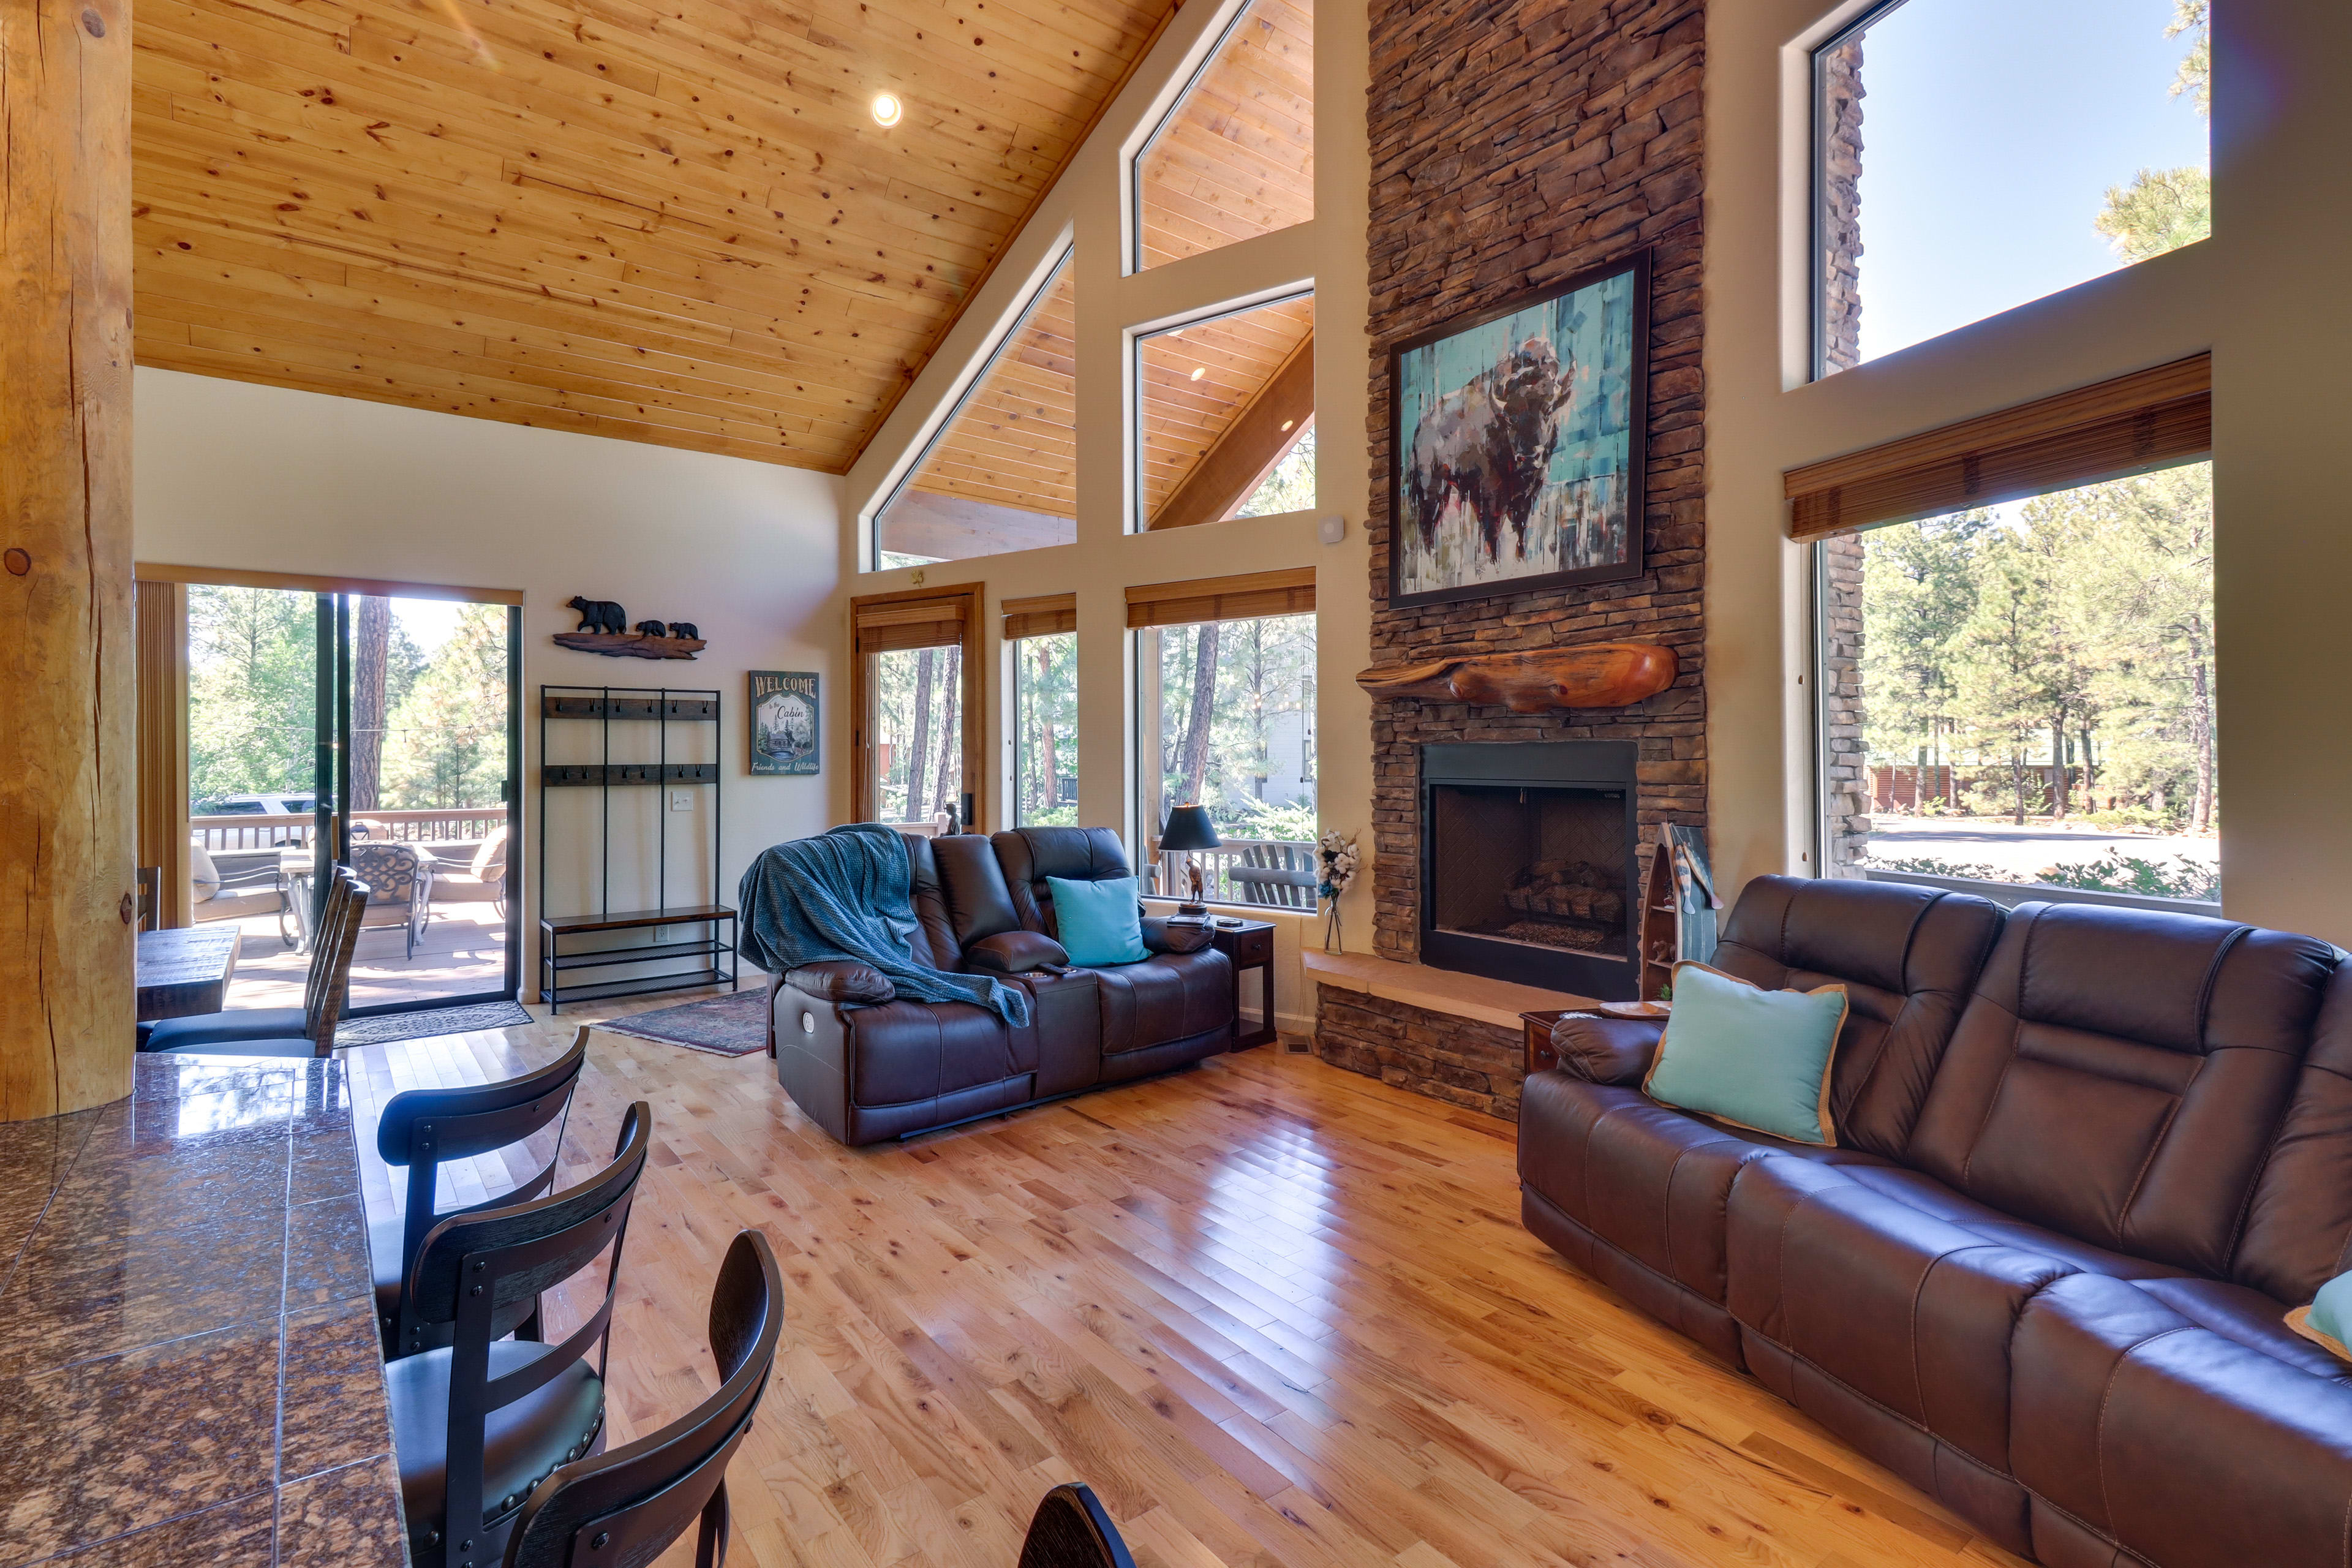 Living Room | Smart TV | Fireplace | Vaulted Ceilings